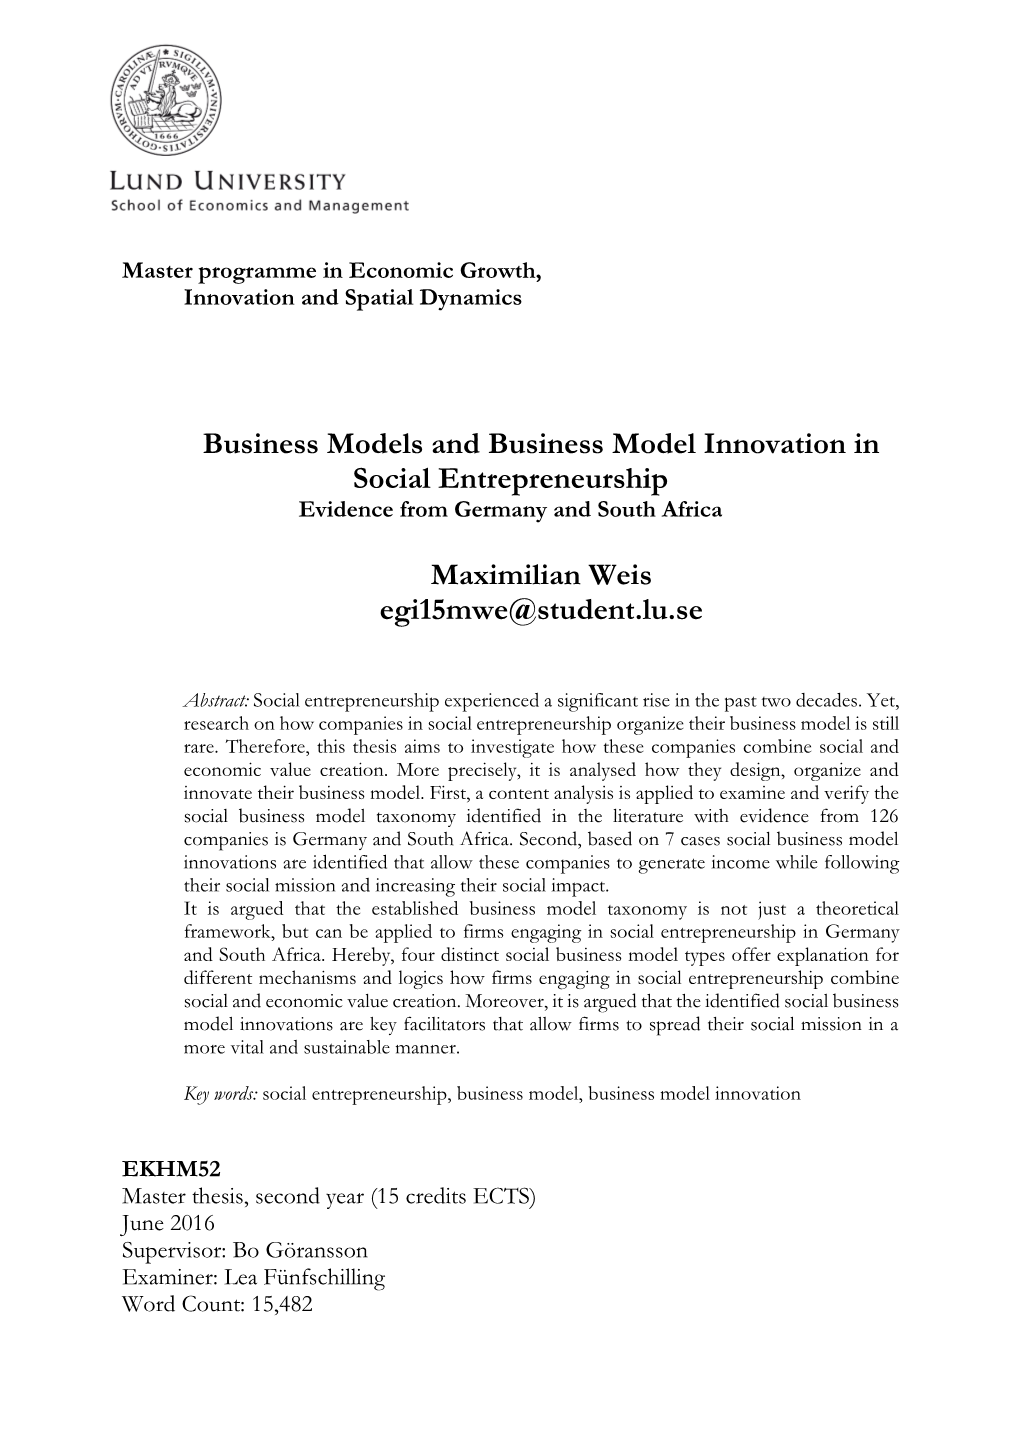 Business Models and Business Model Innovation in Social Entrepreneurship Evidence from Germany and South Africa